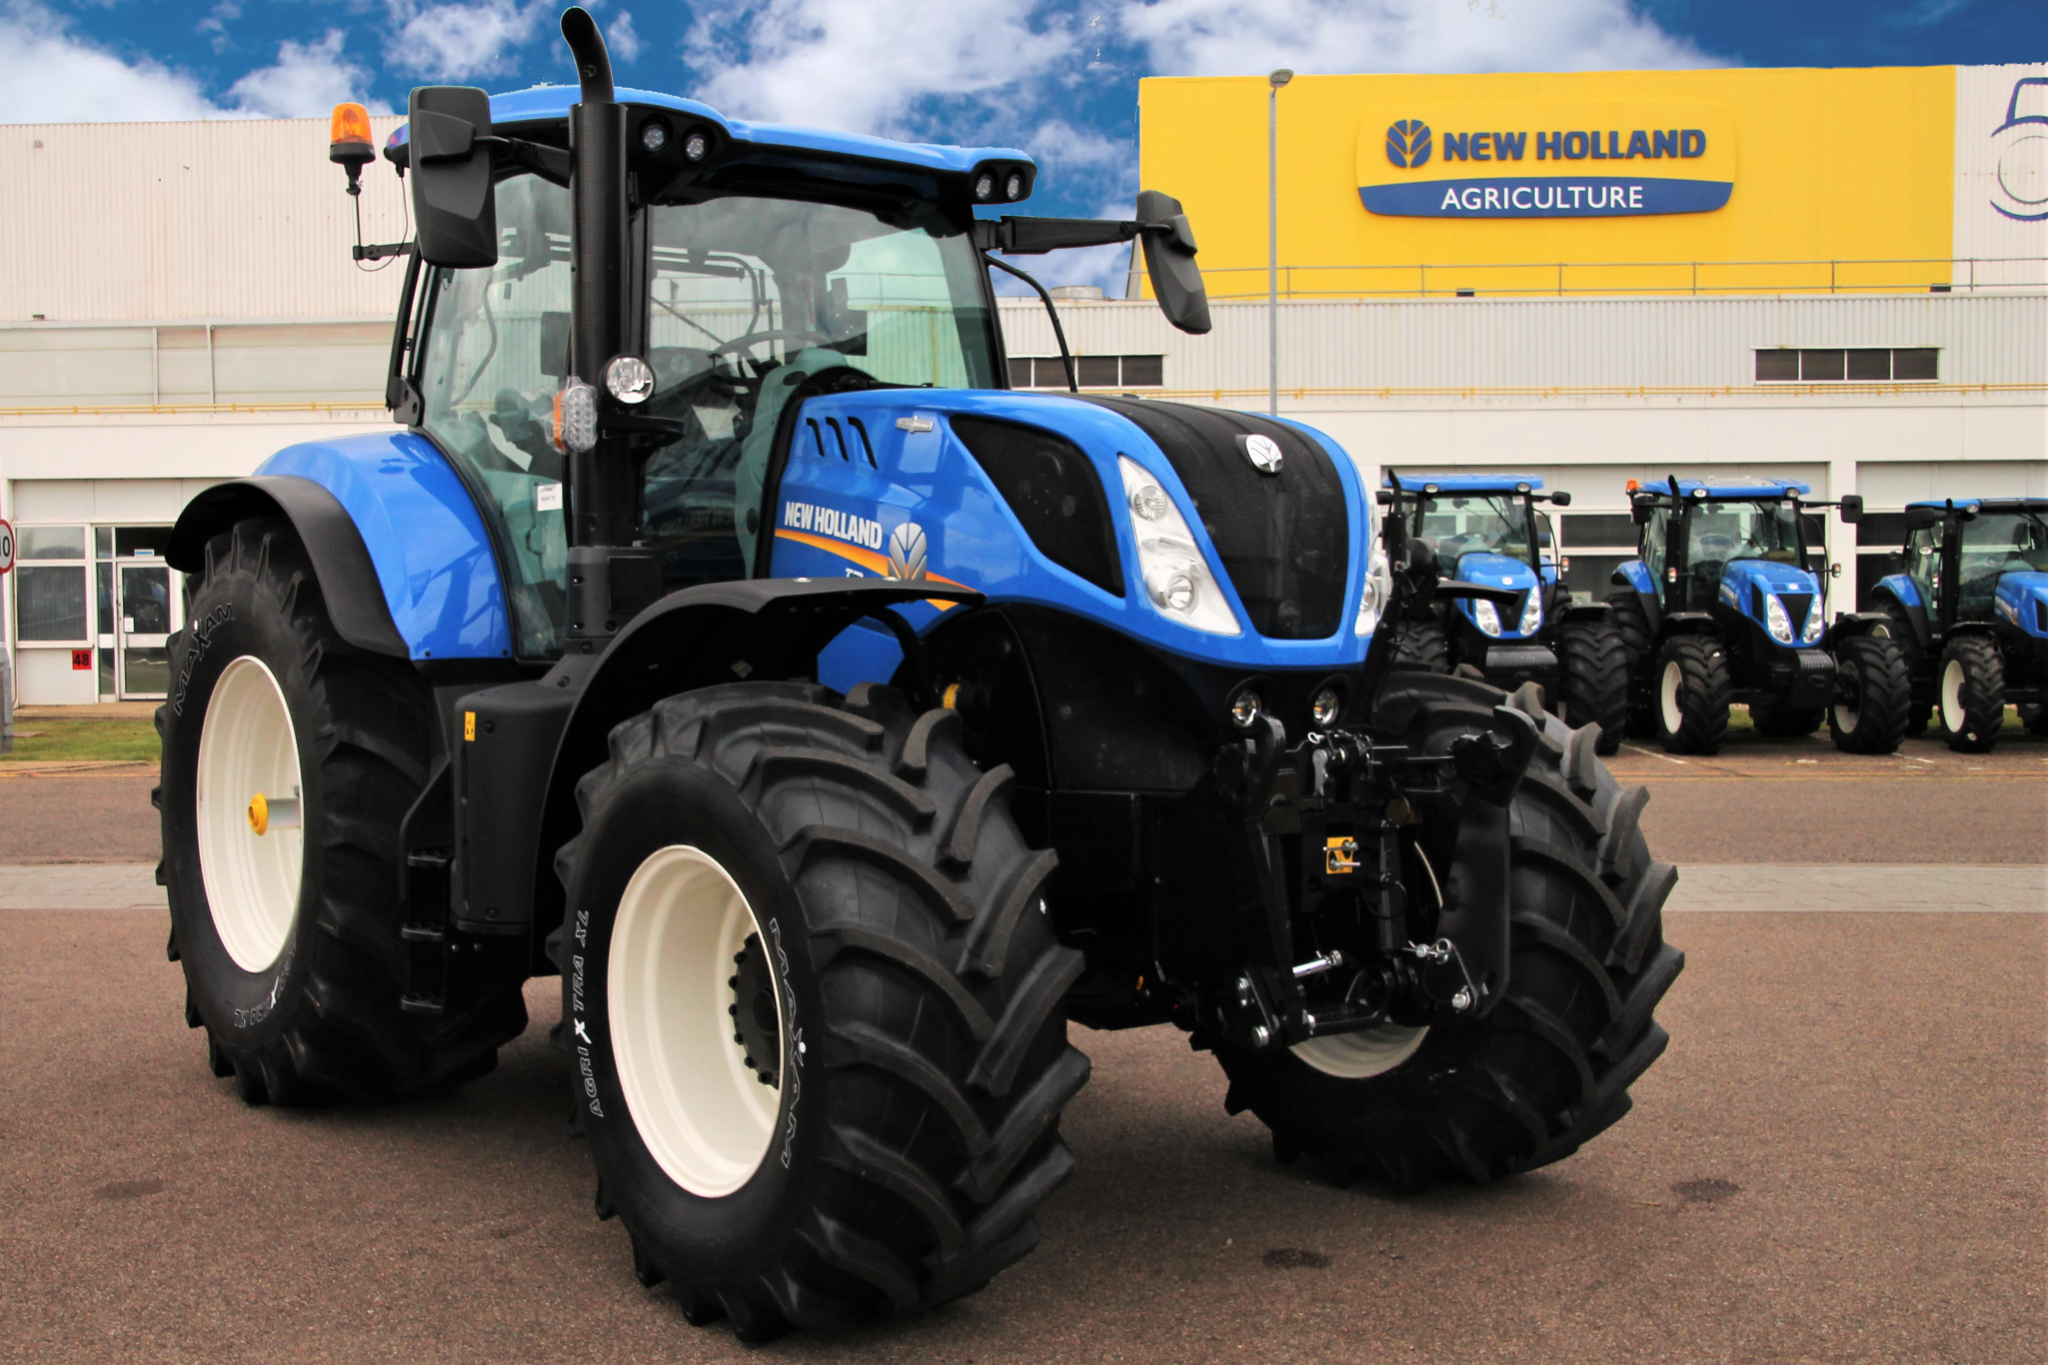 Maxam to supply Agrixtra agricultural tyres to New Holland tractors